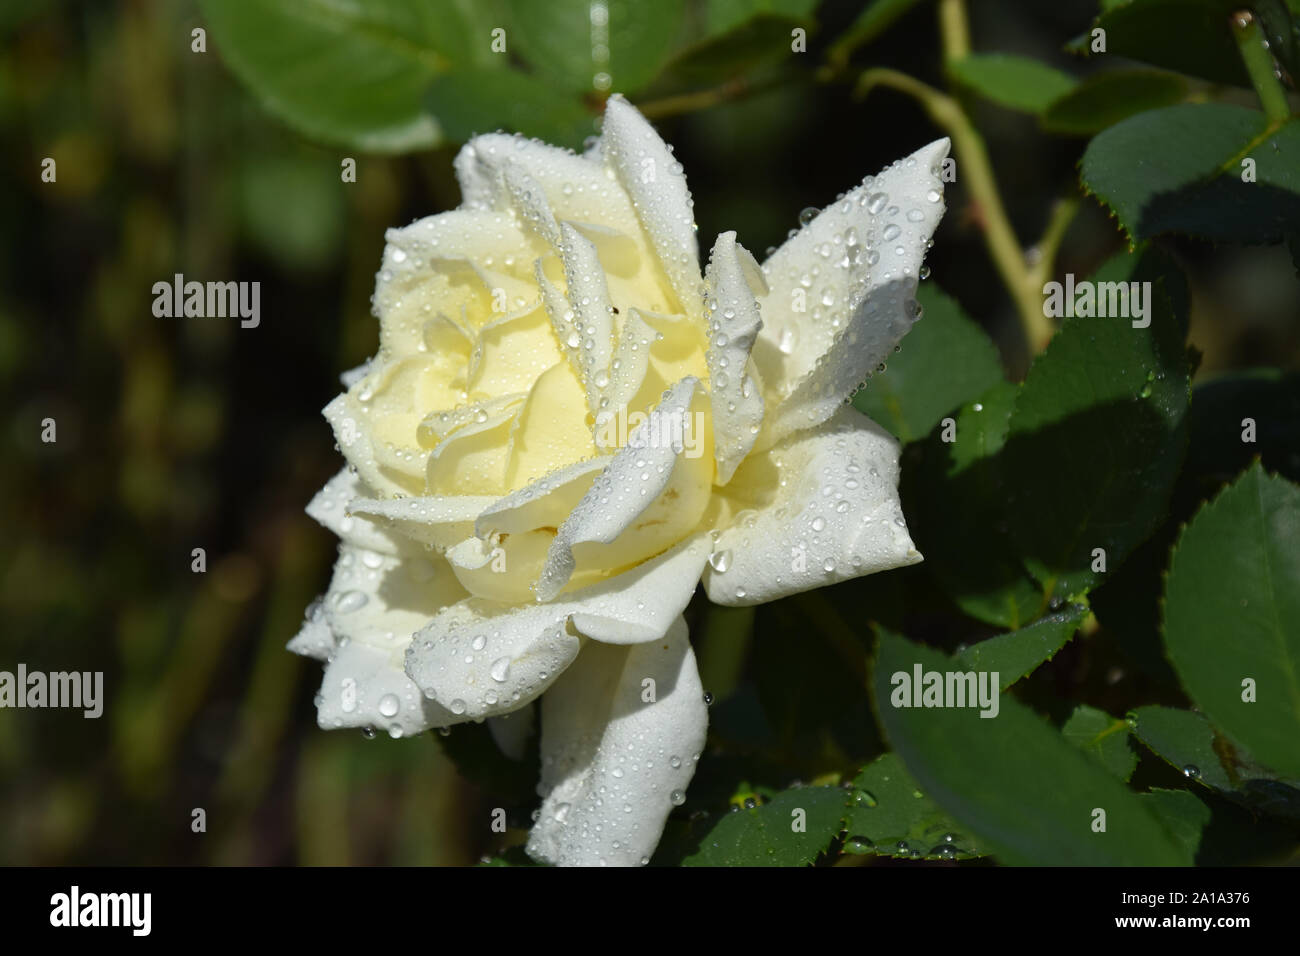 White Rose Blossom with Water Drops on the Petals - Beautiful Garden ...